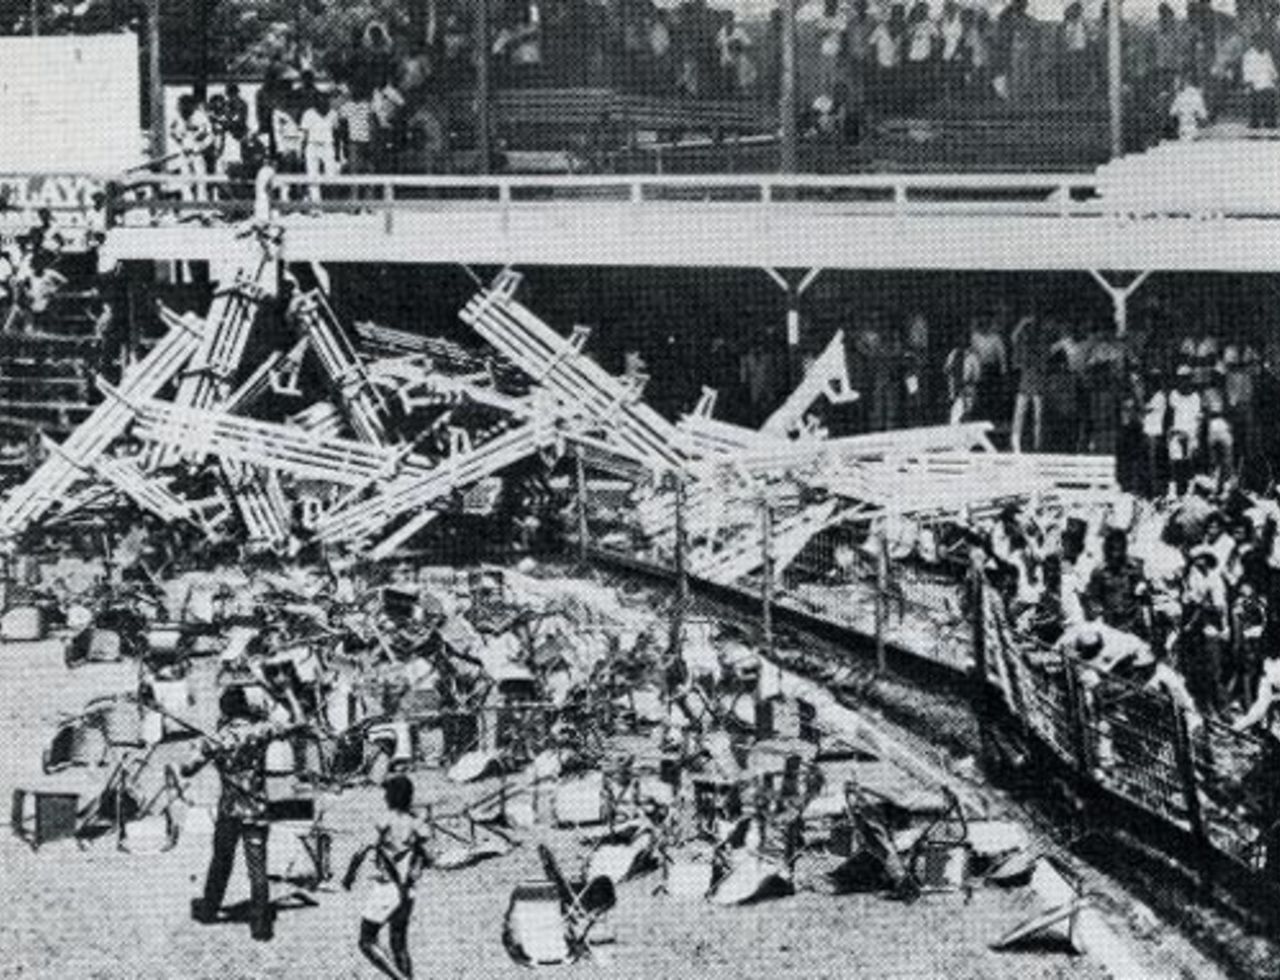 The wreckage after the riot, WSC West Indies v WSC Australia, Guyana, March 25, 1979